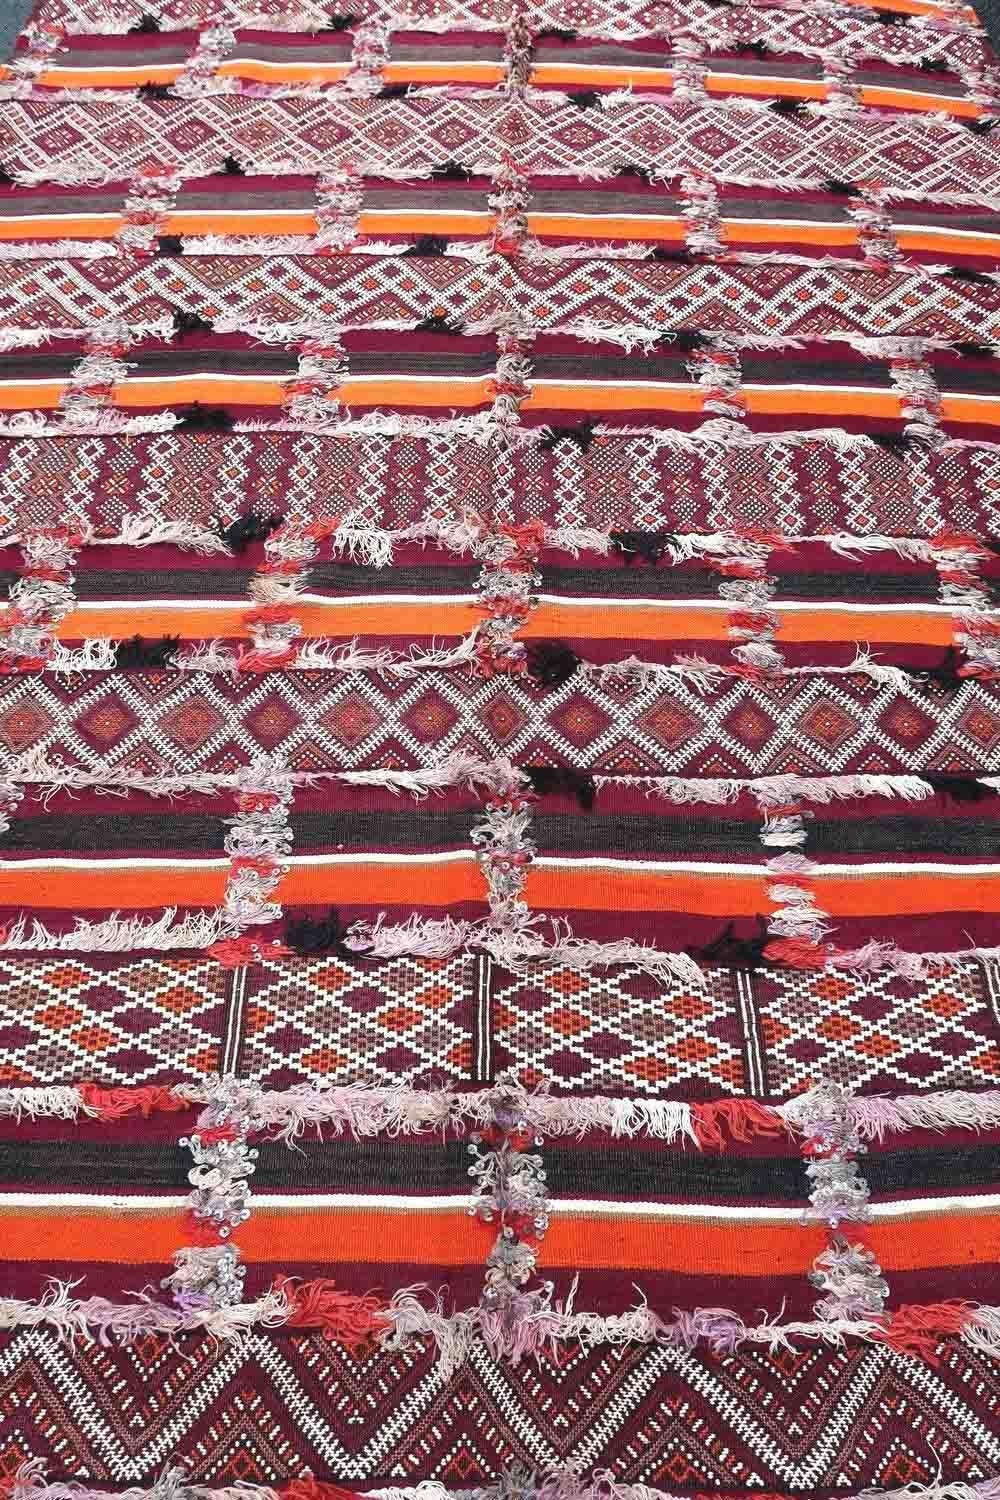 Handmade vintage Moroccan Berber kilim in colorful shades. The rug is from the middle of 20th century in original good condition.

-condition: original good,

-circa: 1950s,

-size: 5.4' x 10.8' (165cm x 332cm),

-material: wool,

-country